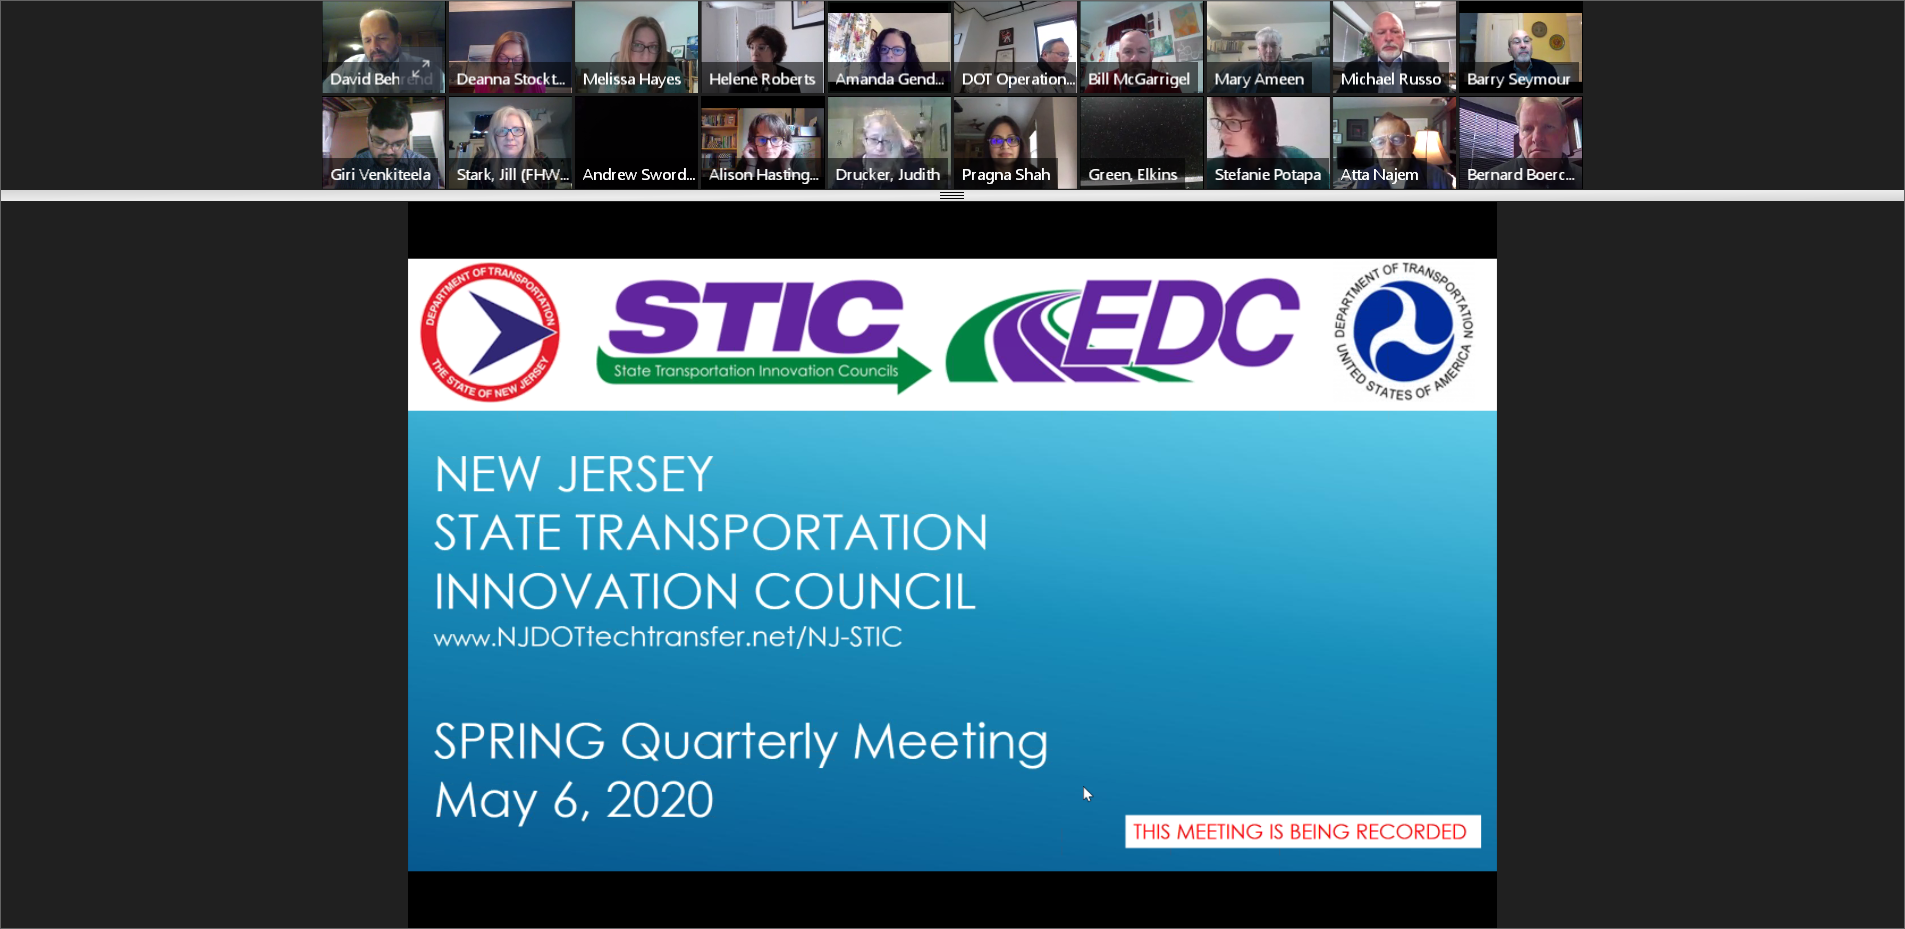 NJ STIC’s first virtual meeting on May 6, 2020